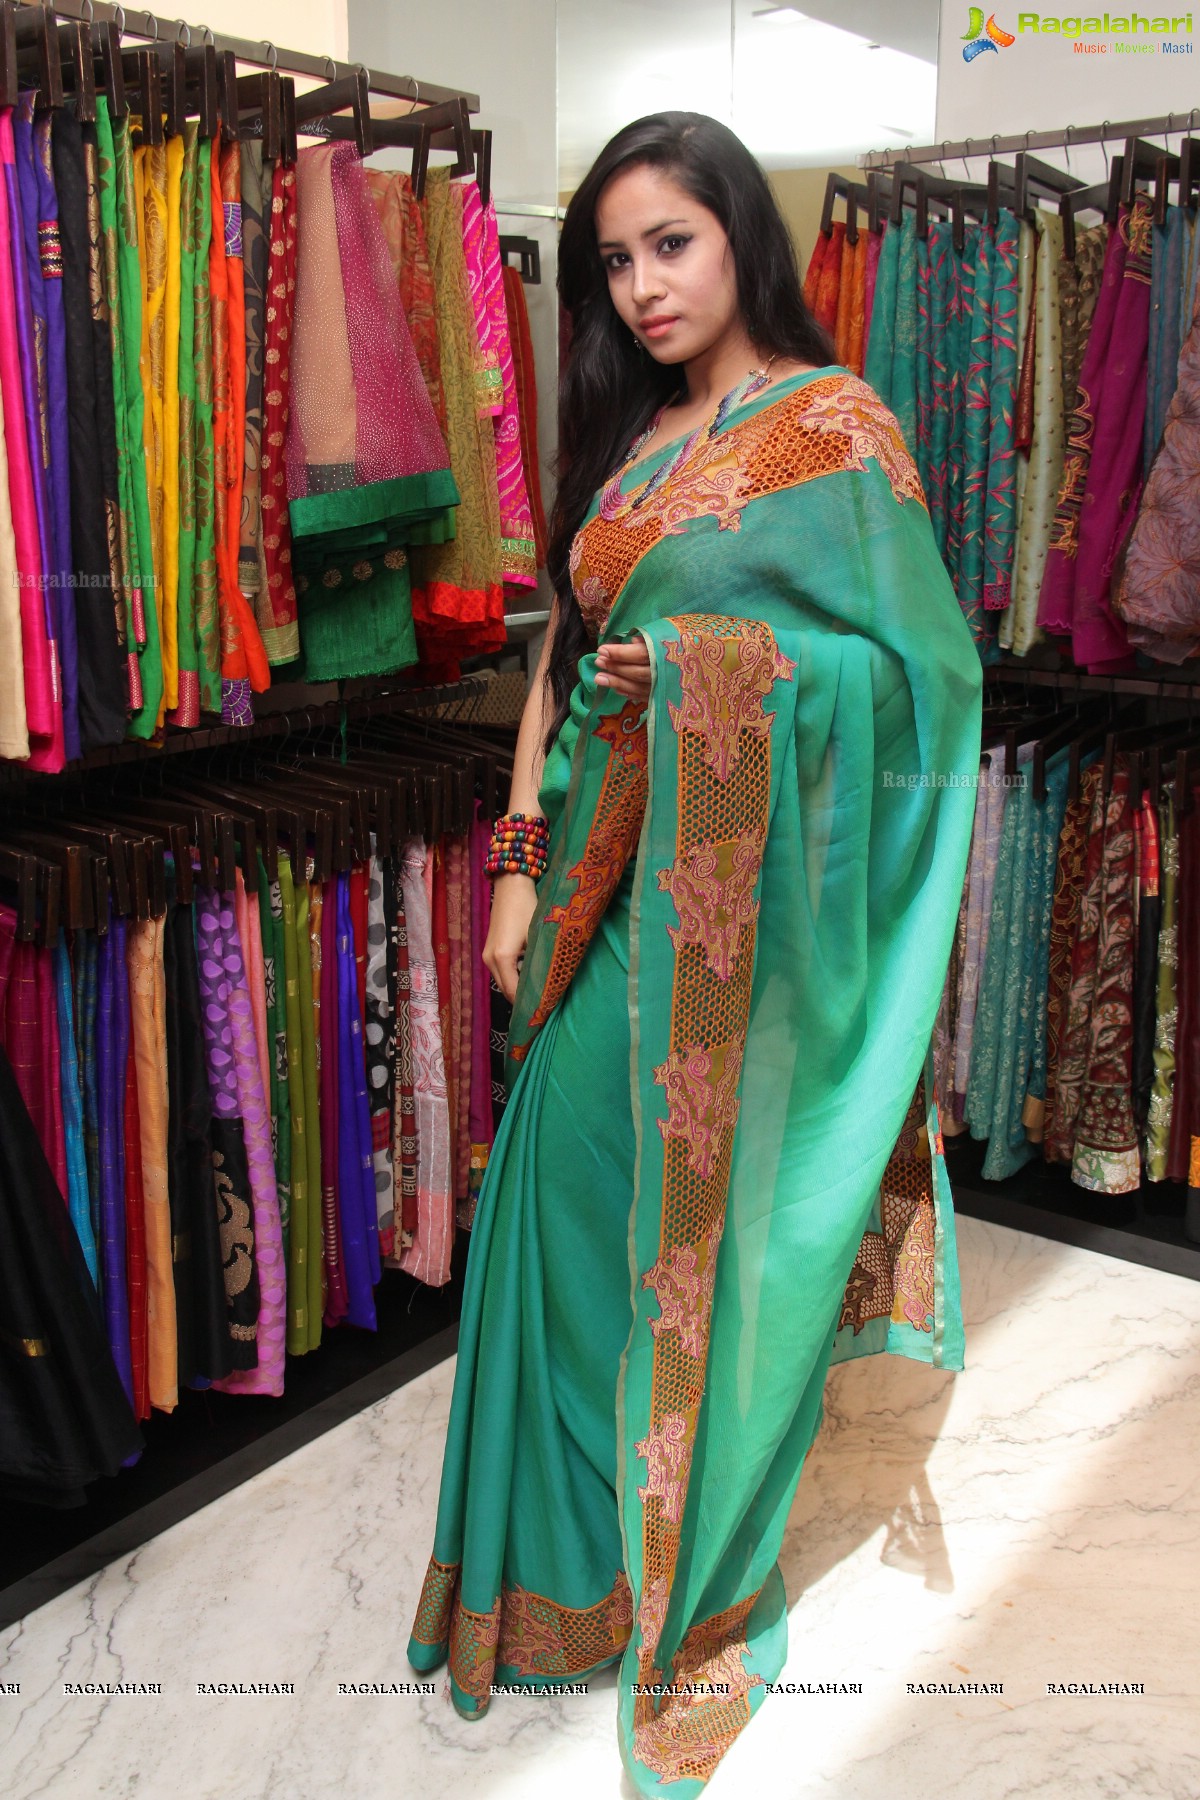 Sakhi Fashions Special New Collection Launch (Feb. 2014)